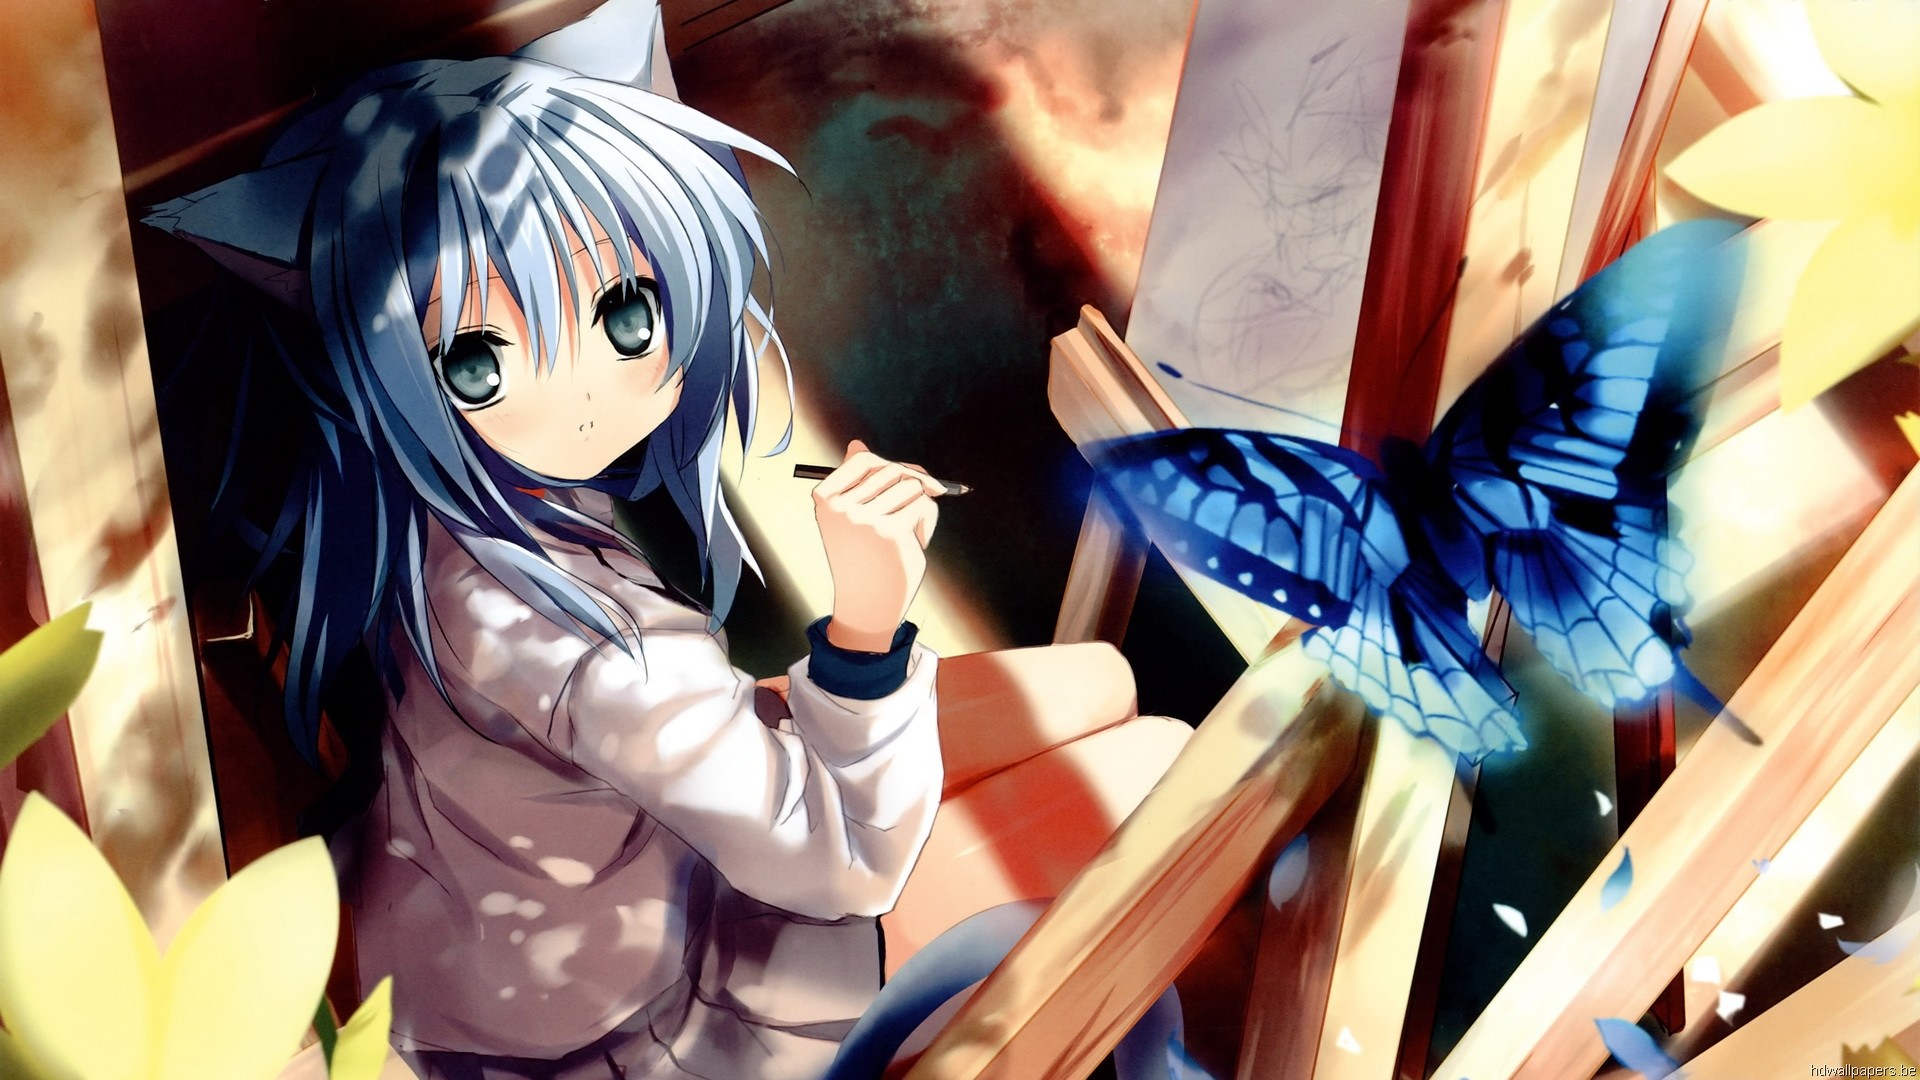 Cute Anime Wallpaper 1920x1080 72 Images